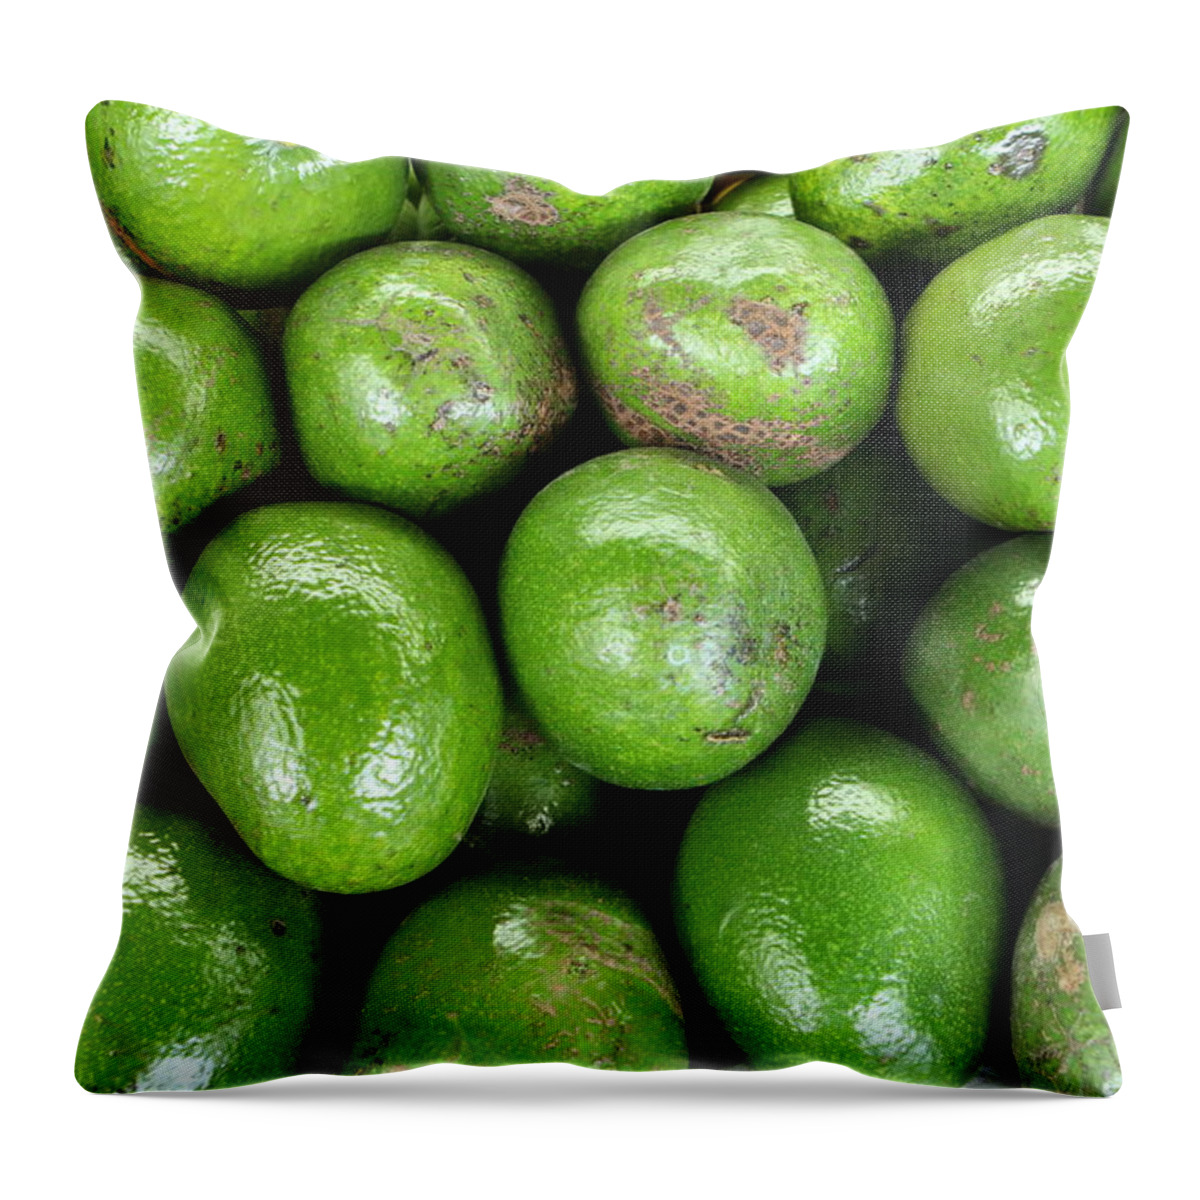 Food Throw Pillow featuring the photograph Avocados 243 by Michael Fryd